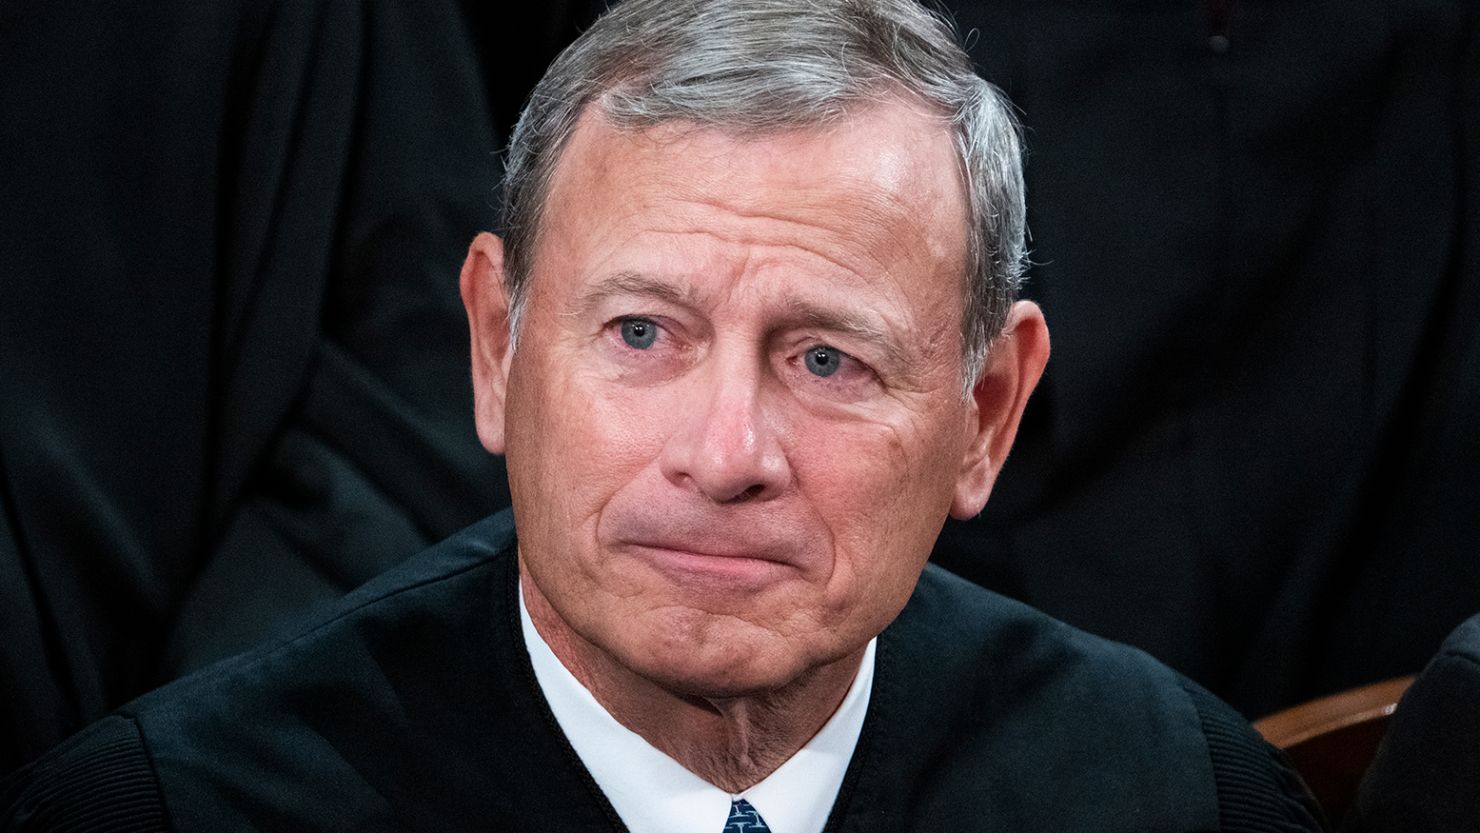 Supreme Court Chief Justice John Roberts attends President Joe Biden's State of the Union address in the House Chamber of the U.S. Capitol on Tuesday, February 7, 2023.